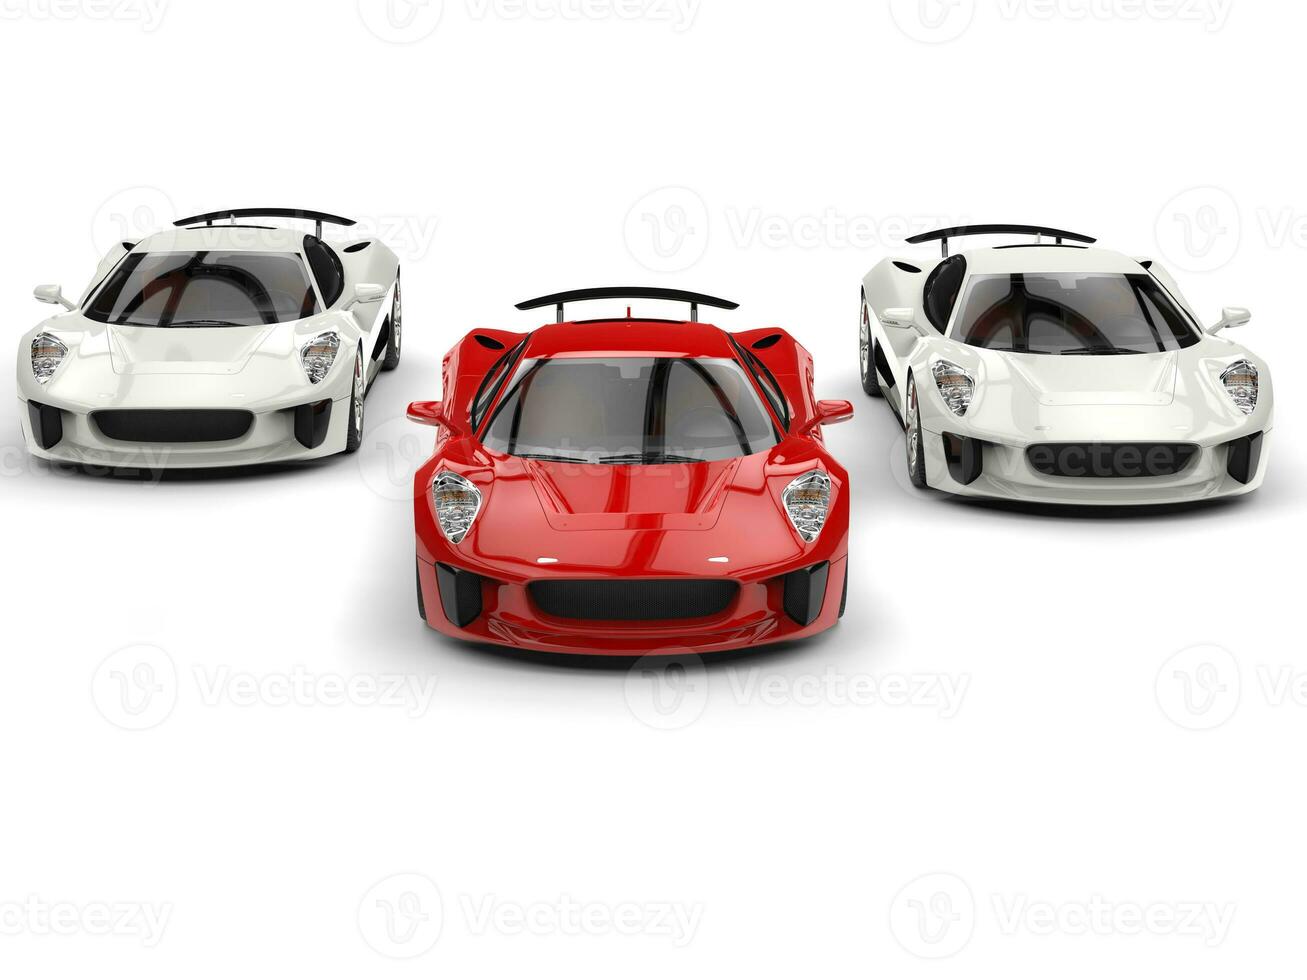 Awesome sports cars - red and white side by side photo